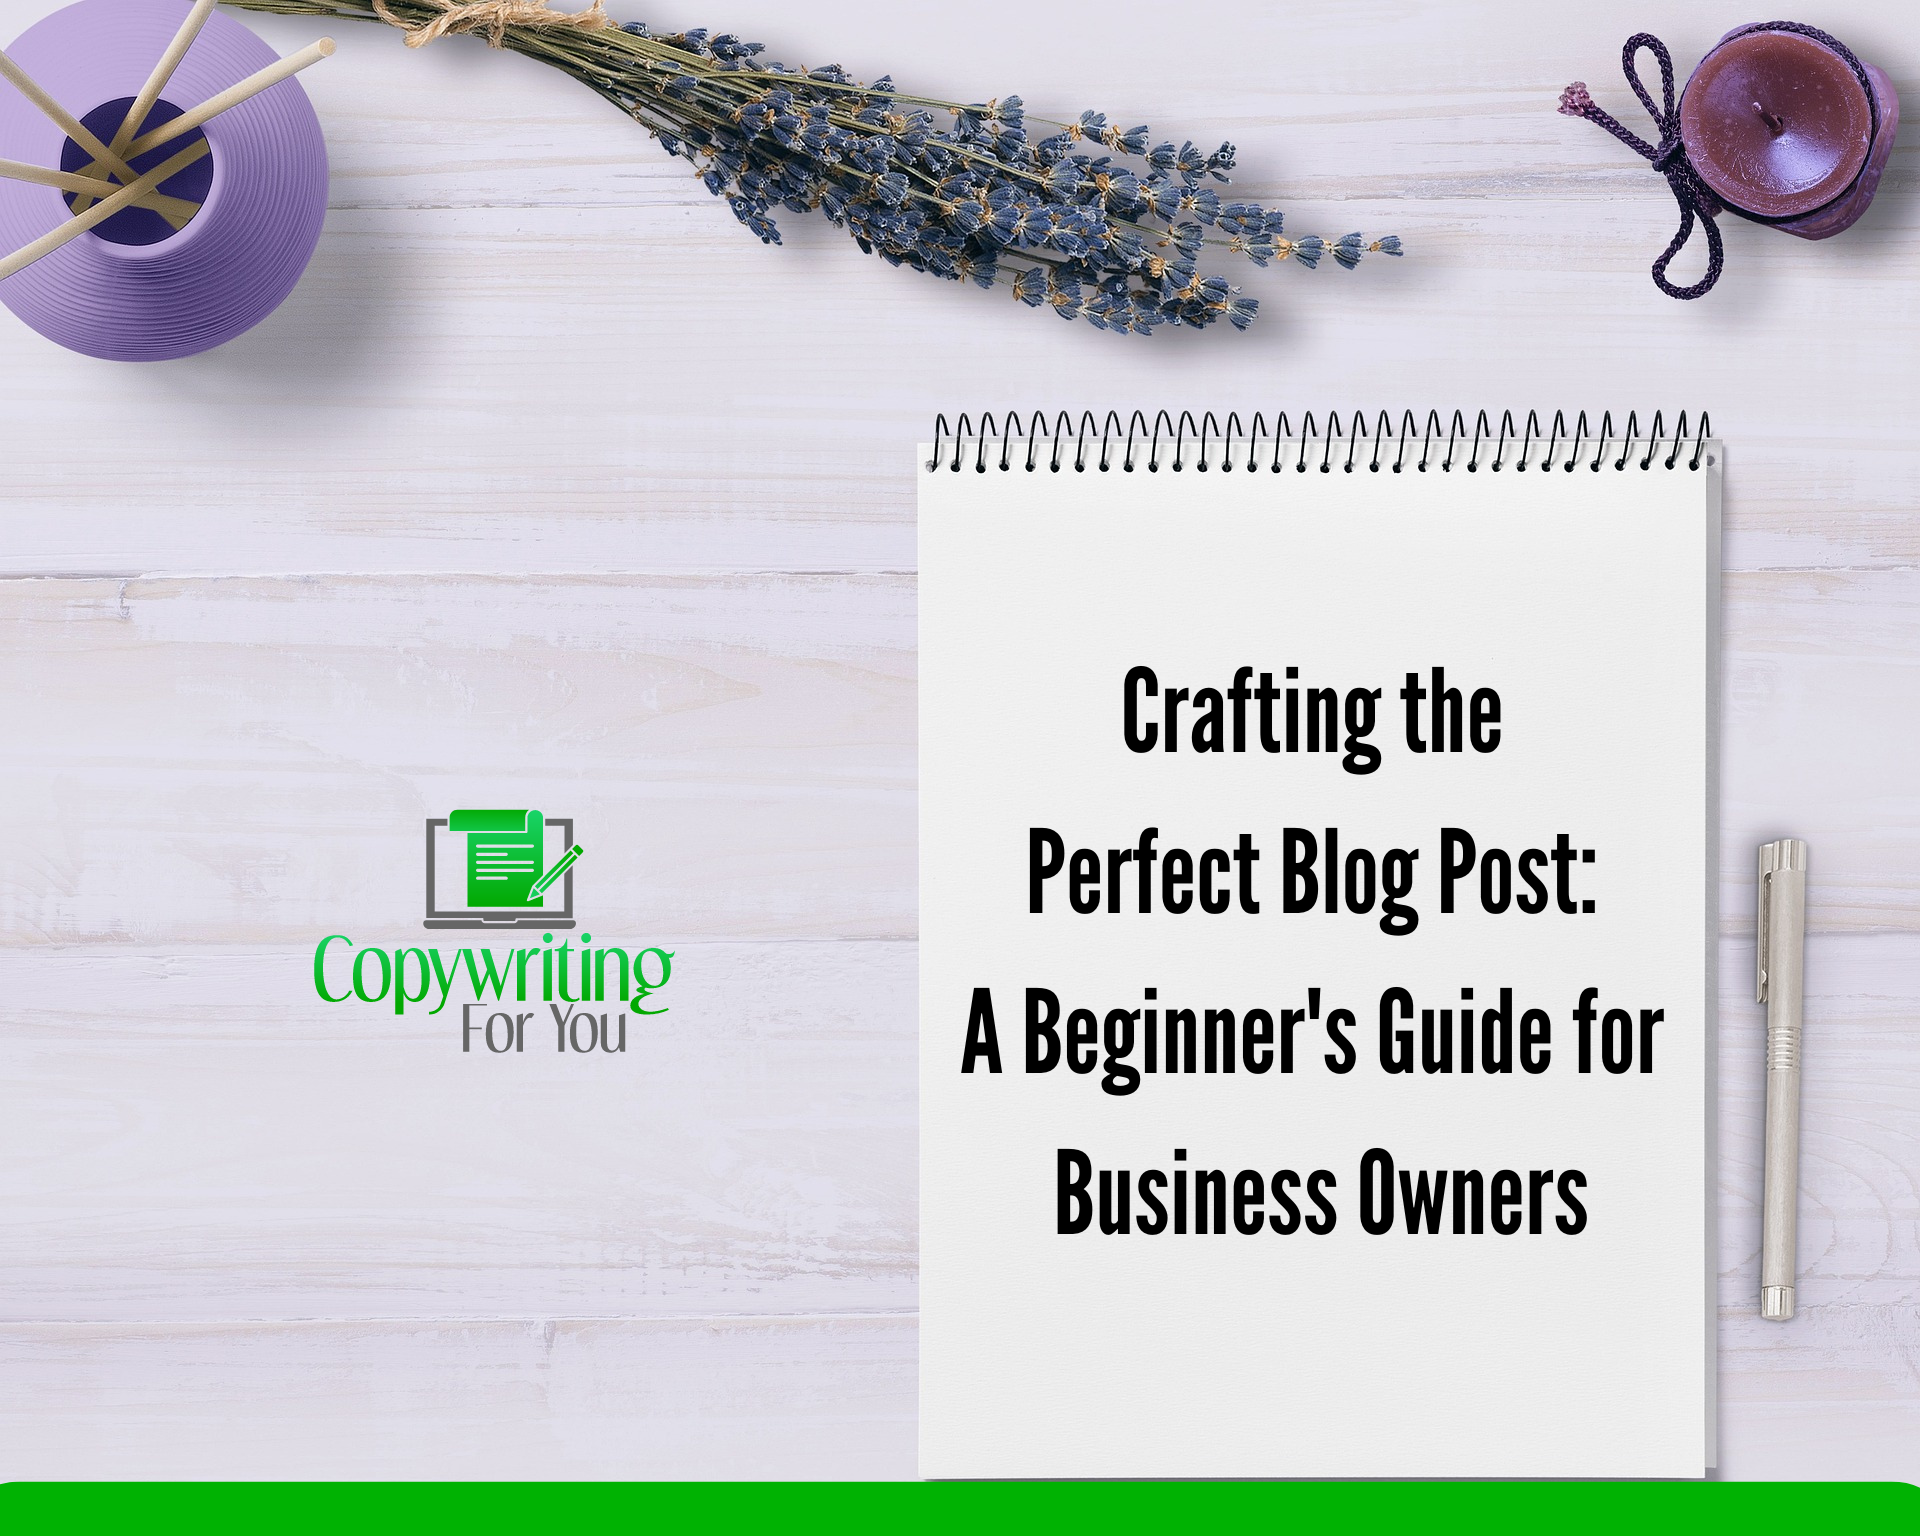 Crafting the Perfect Blog Post: A Beginner’s Guide for Business Owners